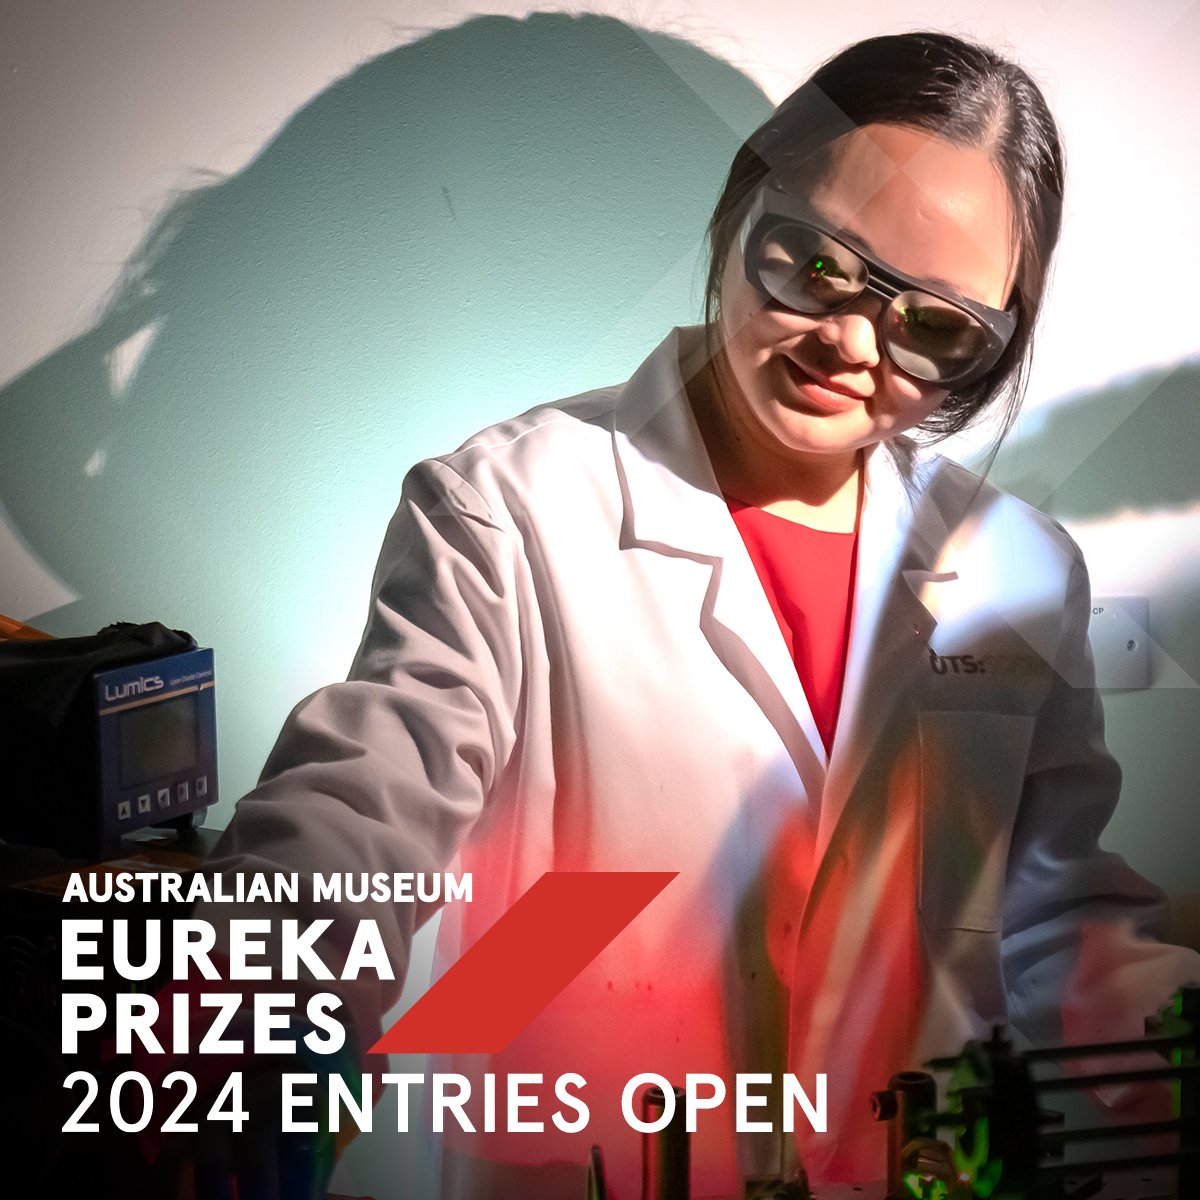 🔬 Are you an #ECR? 🔎 Are you contributing to new insights? 🌍 Has your work had an impact? The @Macquarie_Uni Eureka Prize for Outstanding Early Career Researcher is awarded for outstanding scientific research conducted by an ECR. Learn more: australian.museum/get-involved/e…